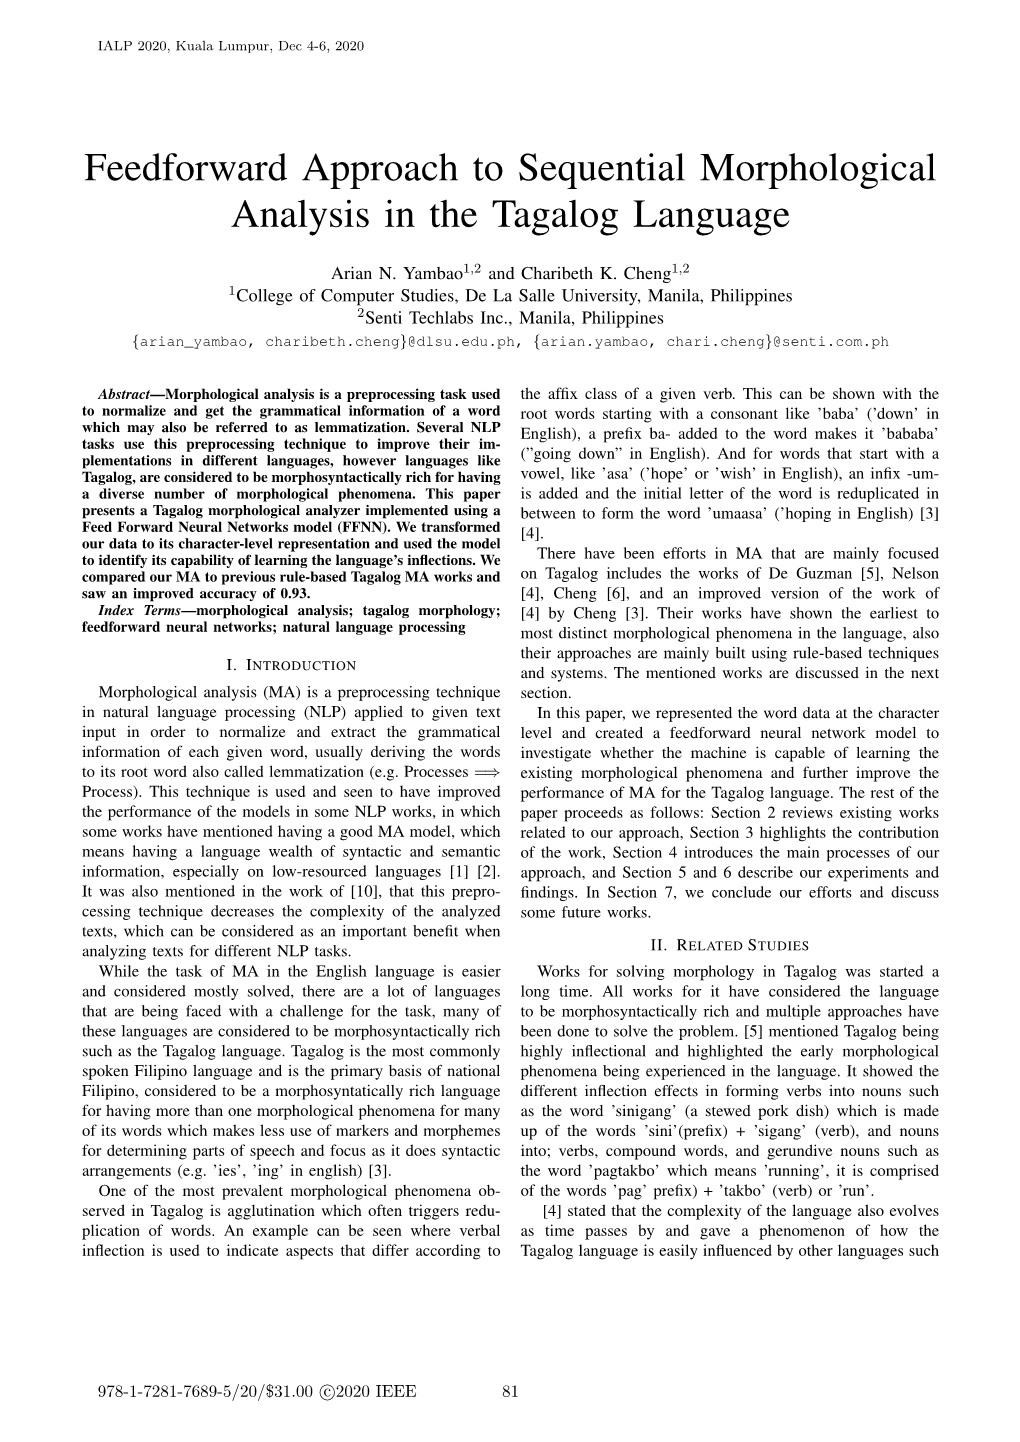 Feedforward Approach to Sequential Morphological Analysis in the Tagalog Language